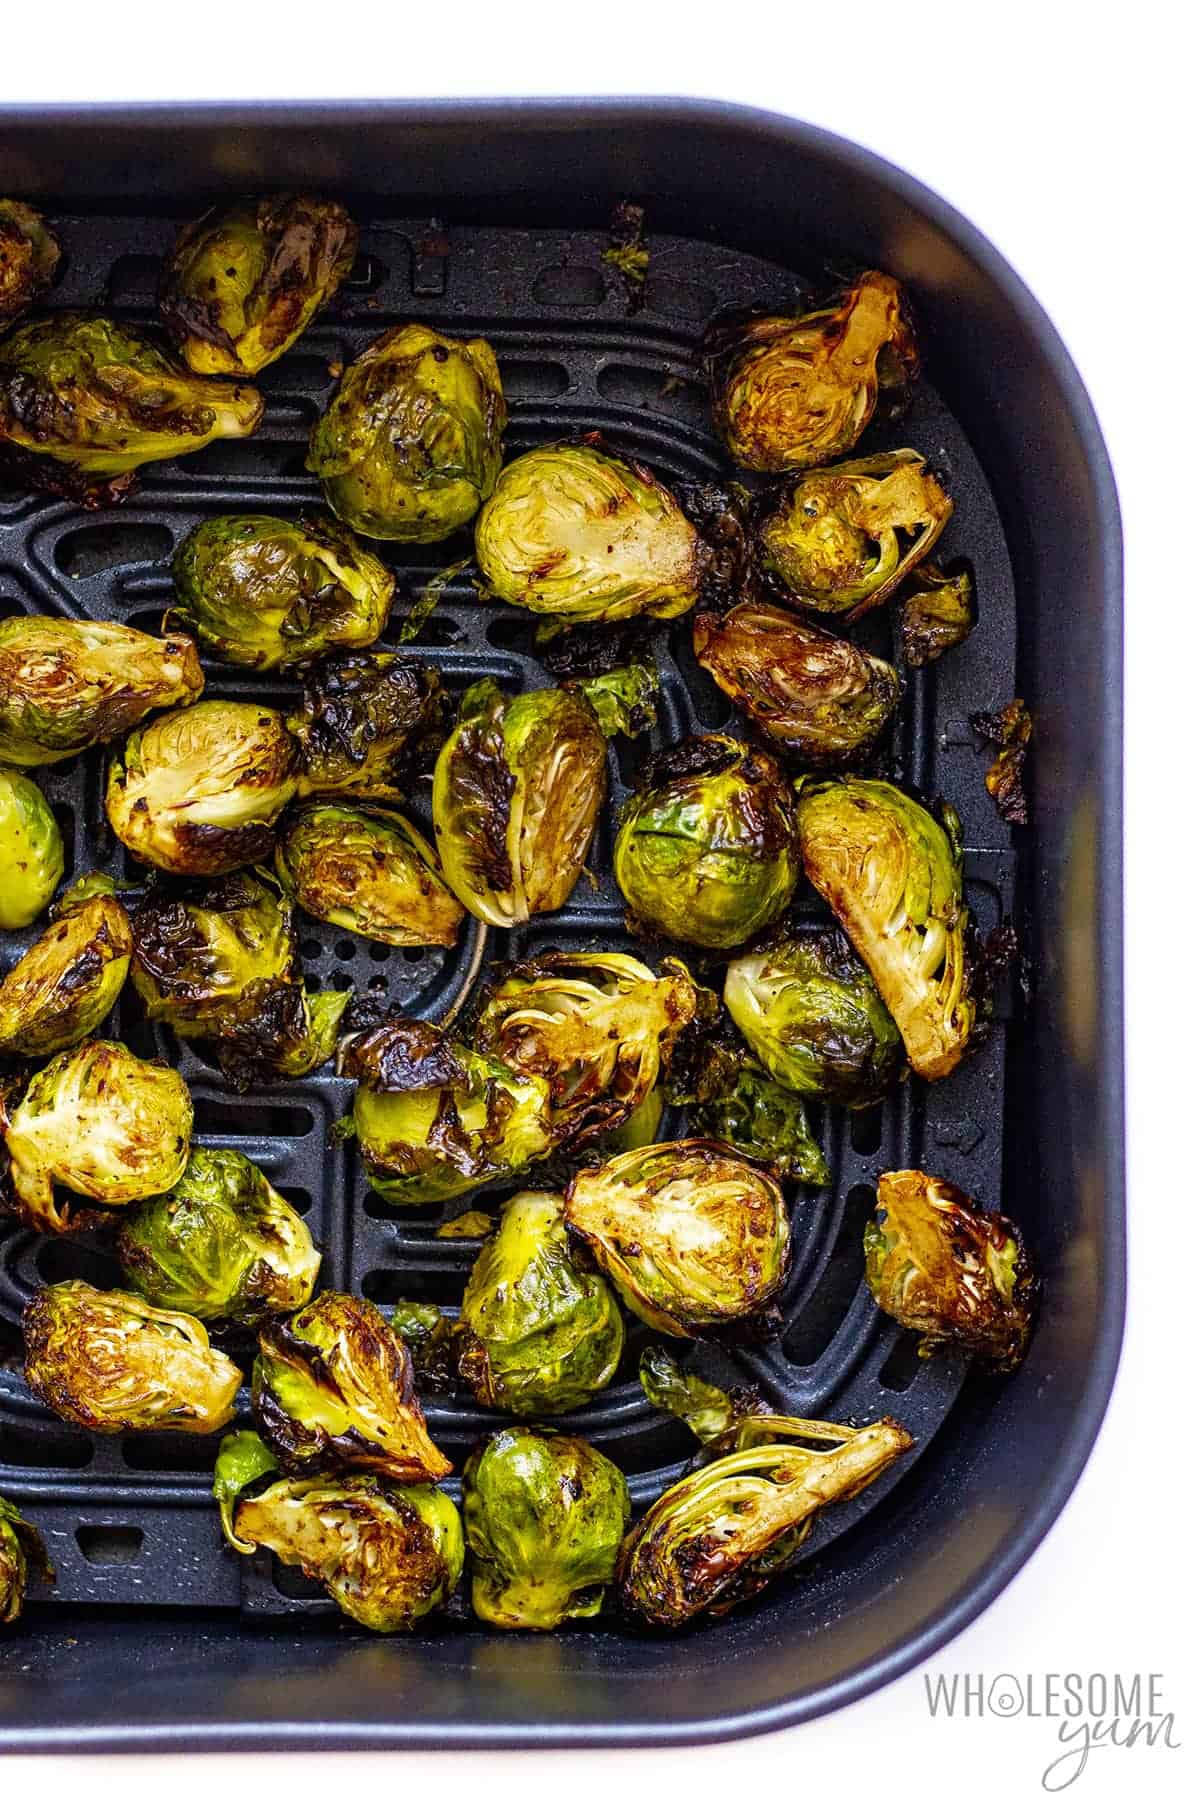 Roasted brussels sprouts in air fryer basket